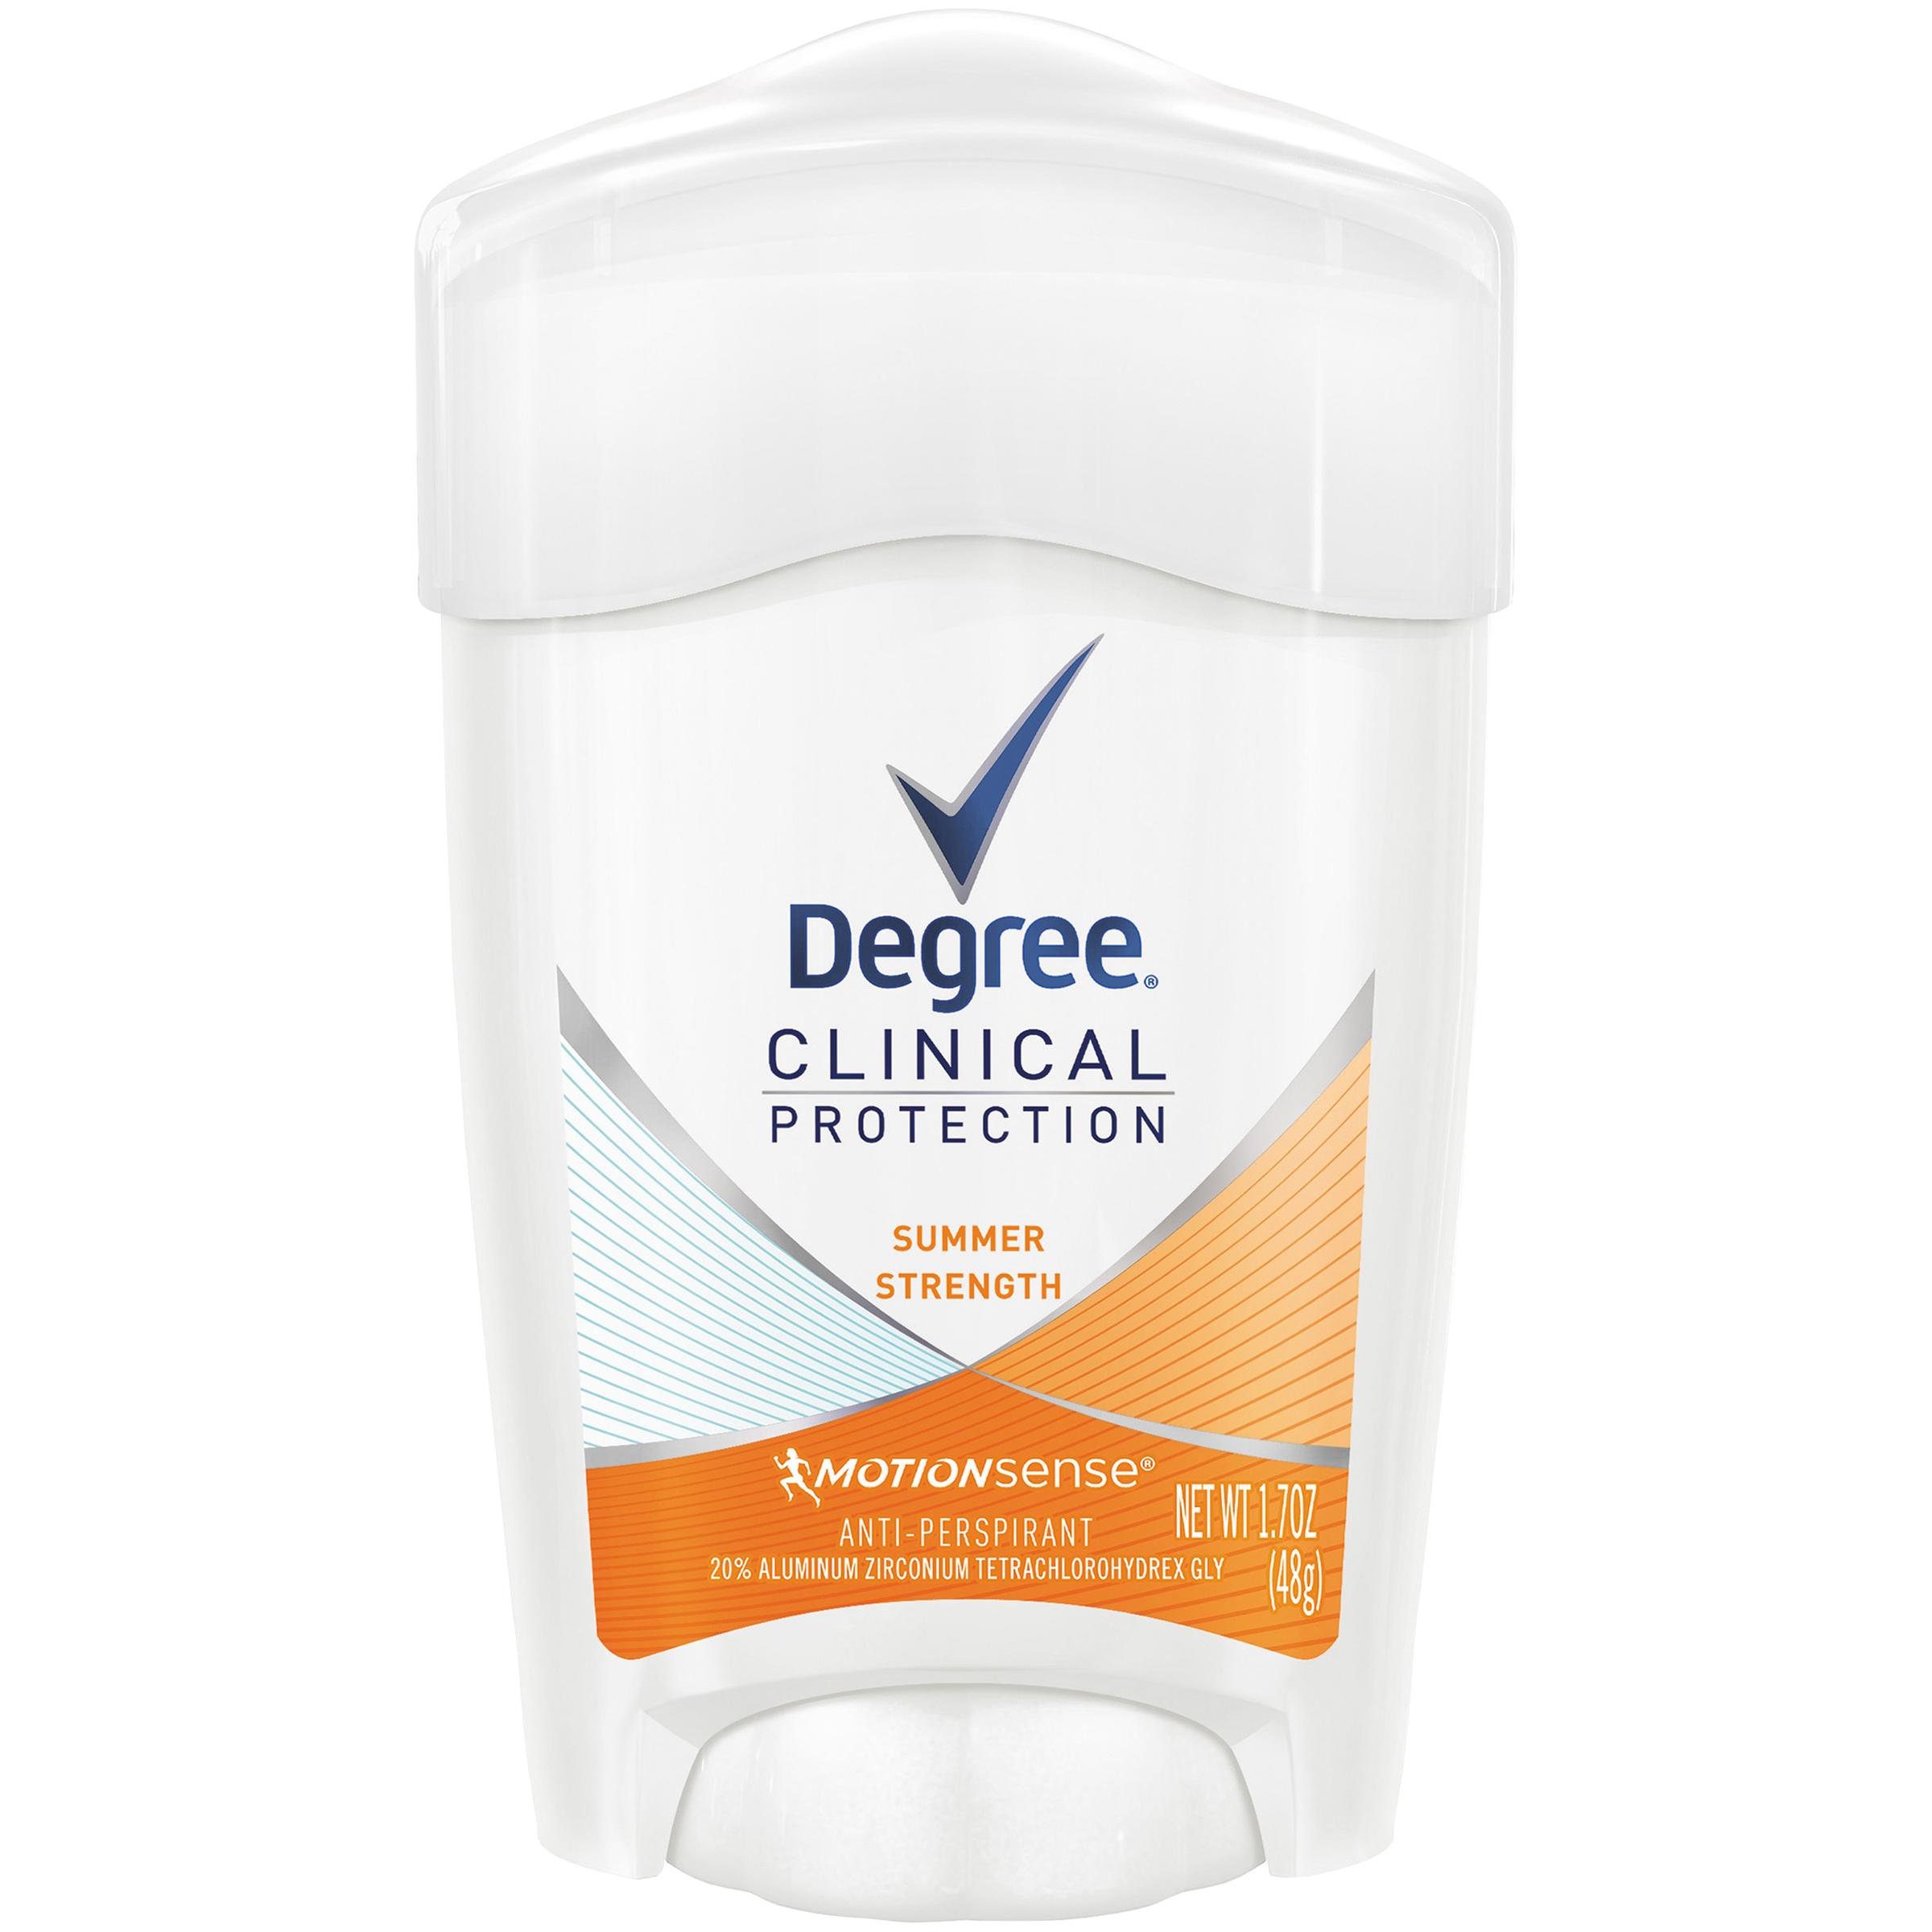 Clinical Protection Summer Strength Anti-Perspirant & Deodorant 1.7 oz. Box